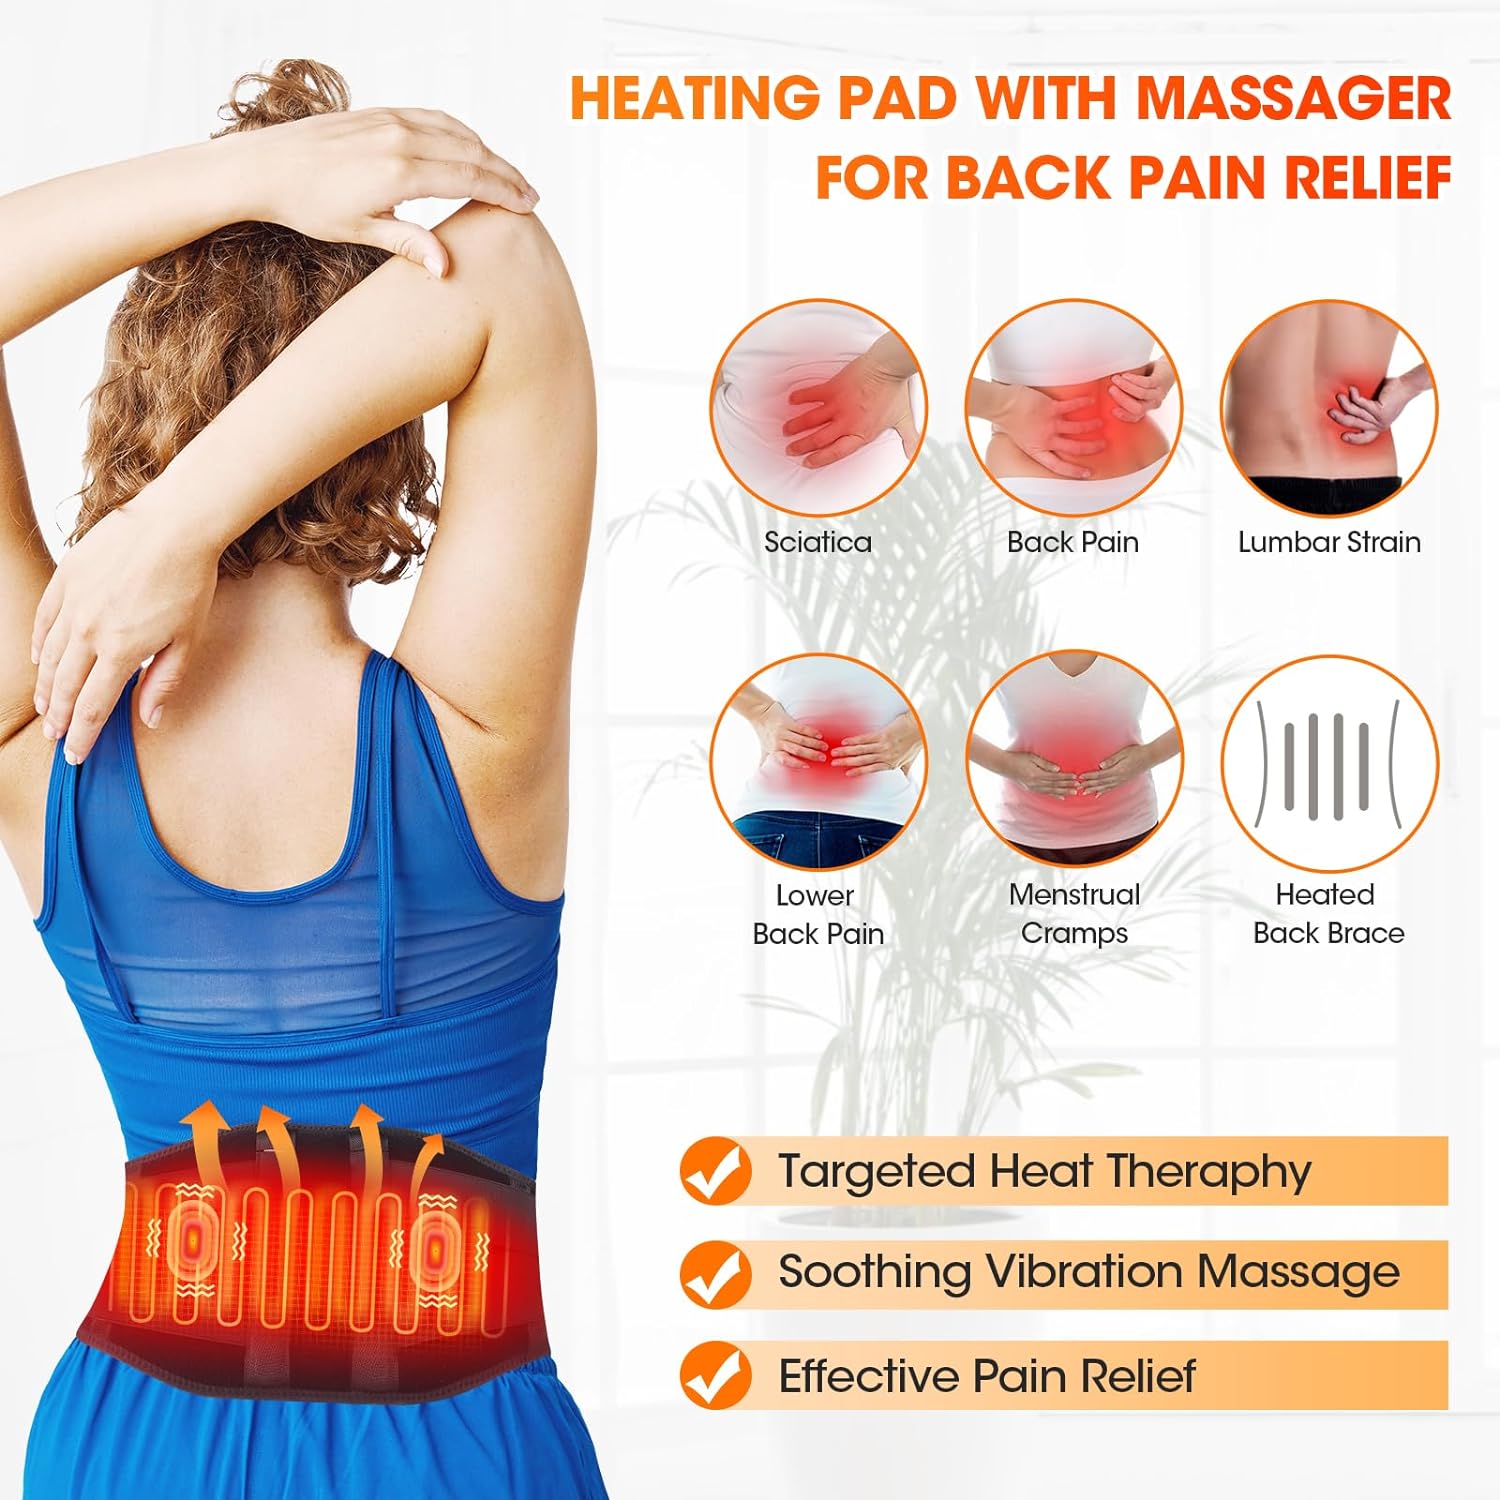 CUEHEAT Heating Pad for Back Pain Relief - Heating Pad Back Brace with Heat  and Massage,Heat Belt for Back Pain Relief Belly Lumbar Spine Stomach